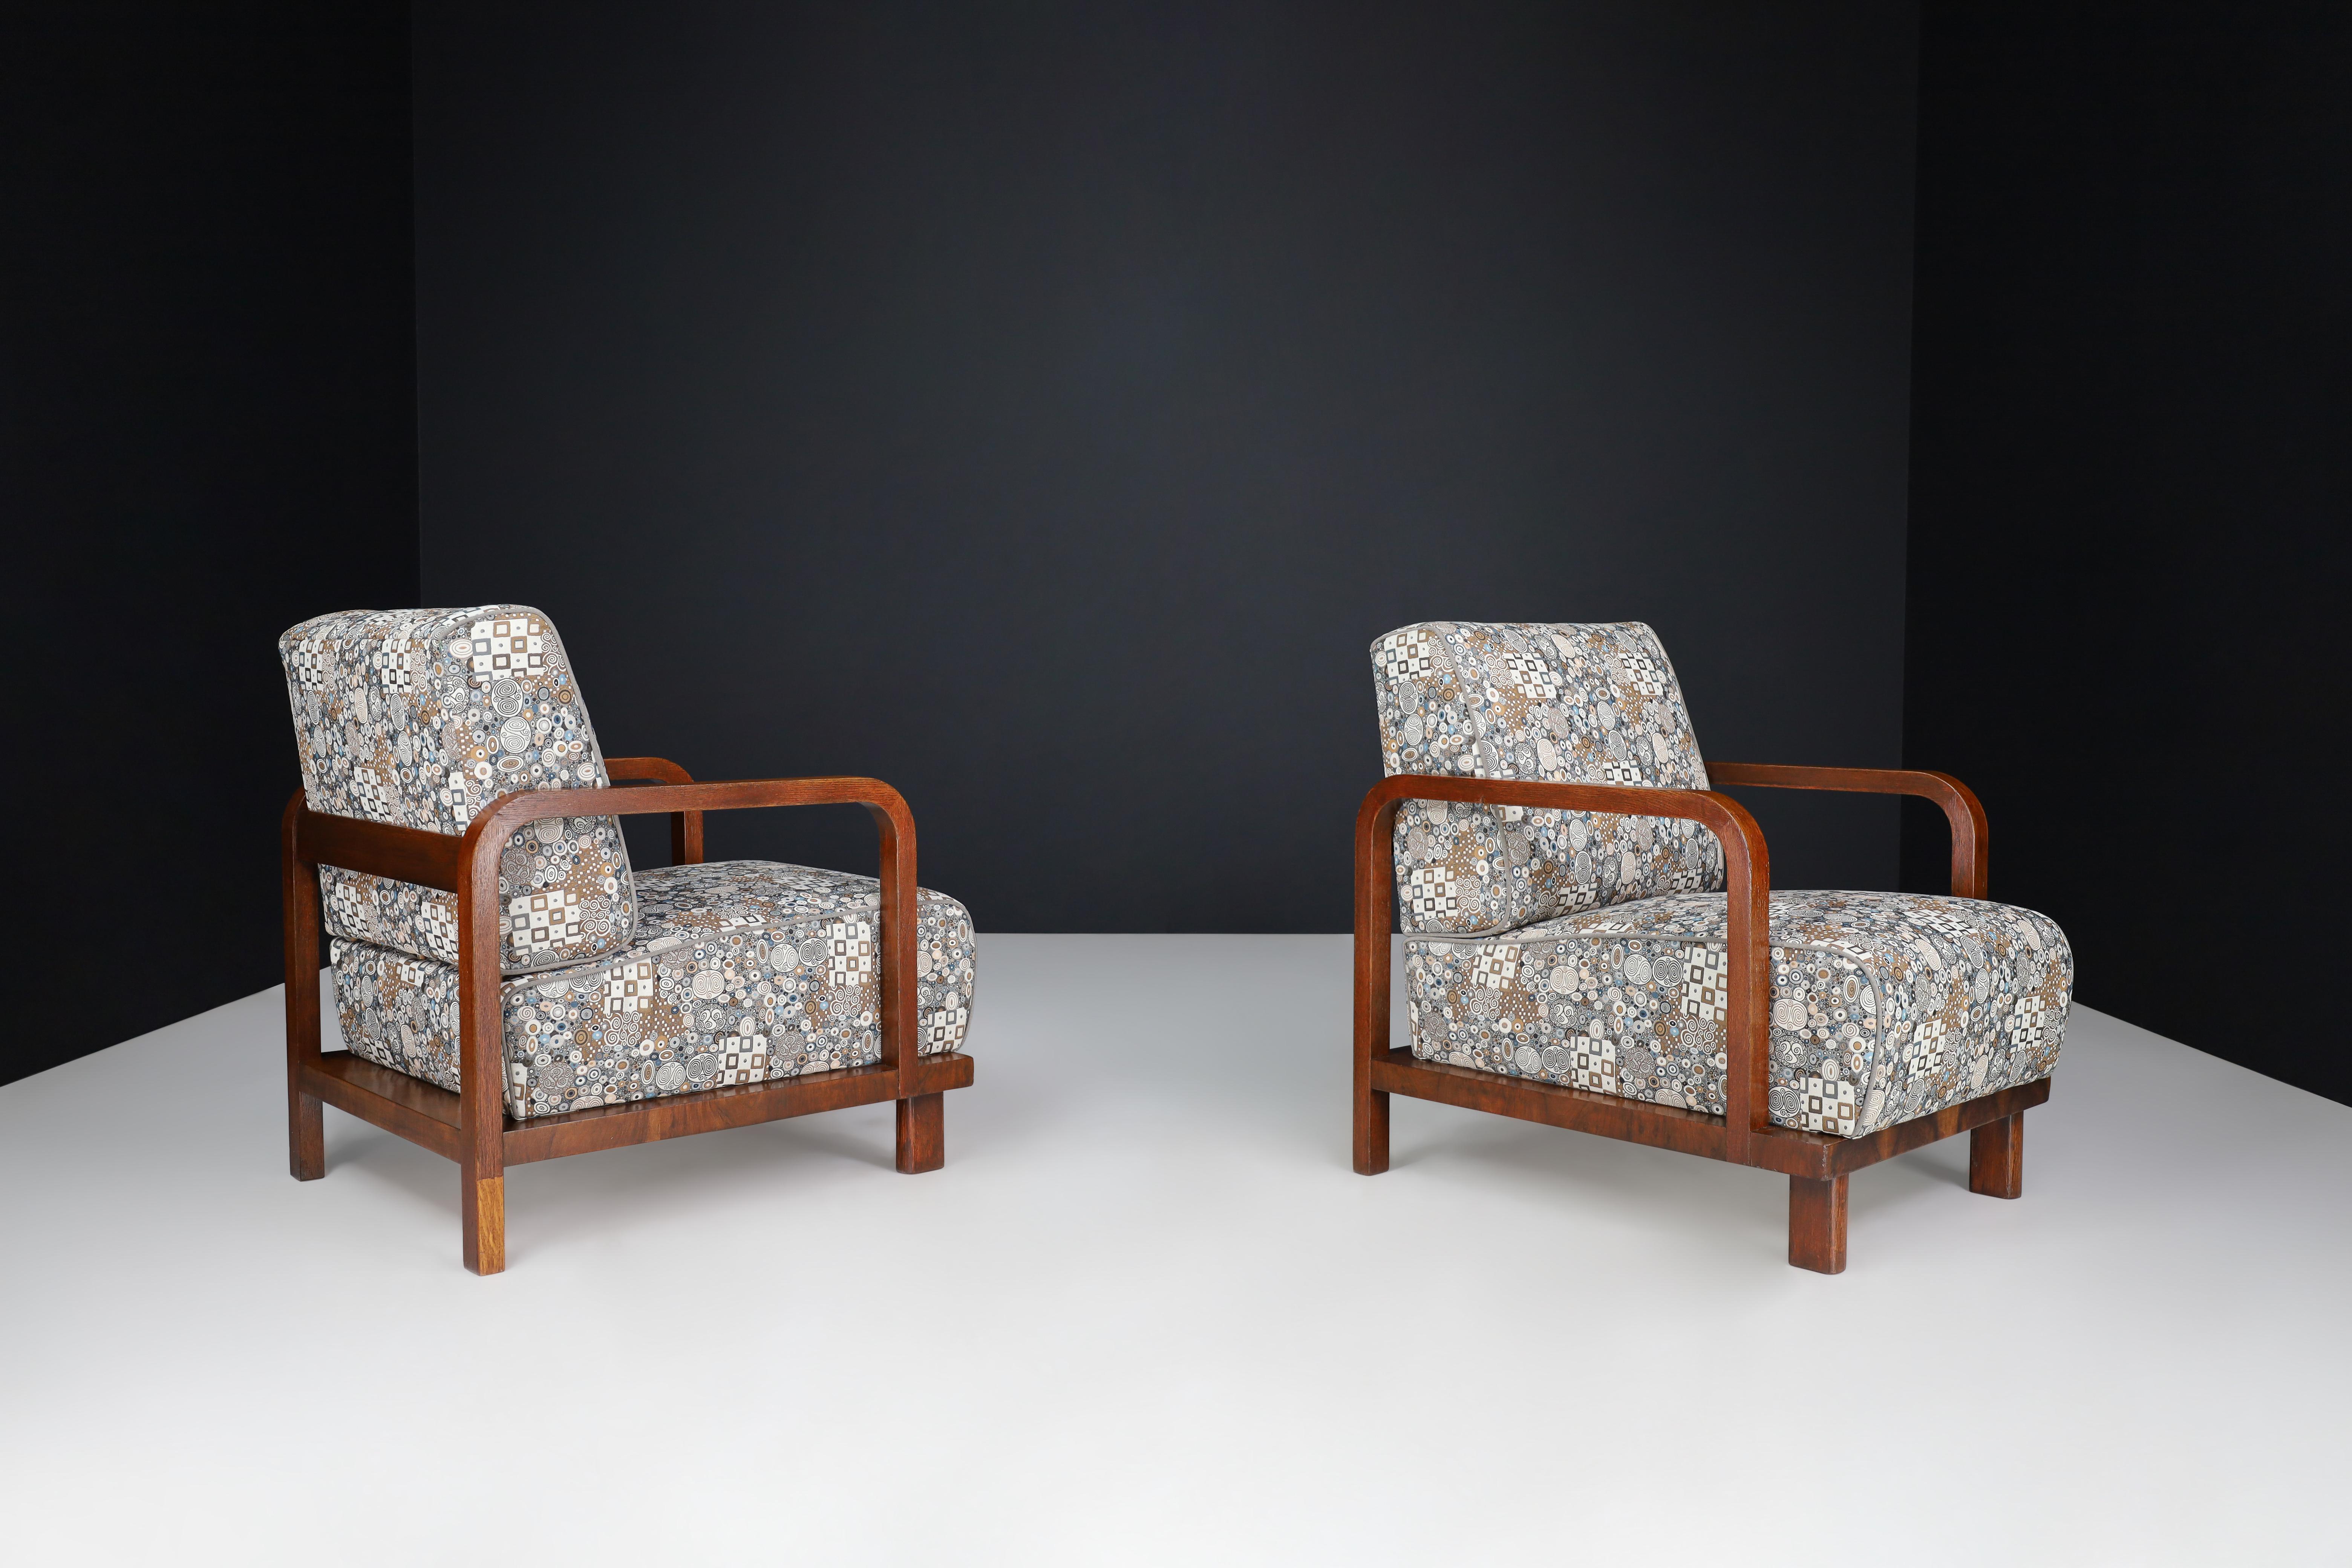 Czech Pair of Two Art Deco Lounge Chairs Re-upholstered  Art Deco Fabric, France 1930s For Sale